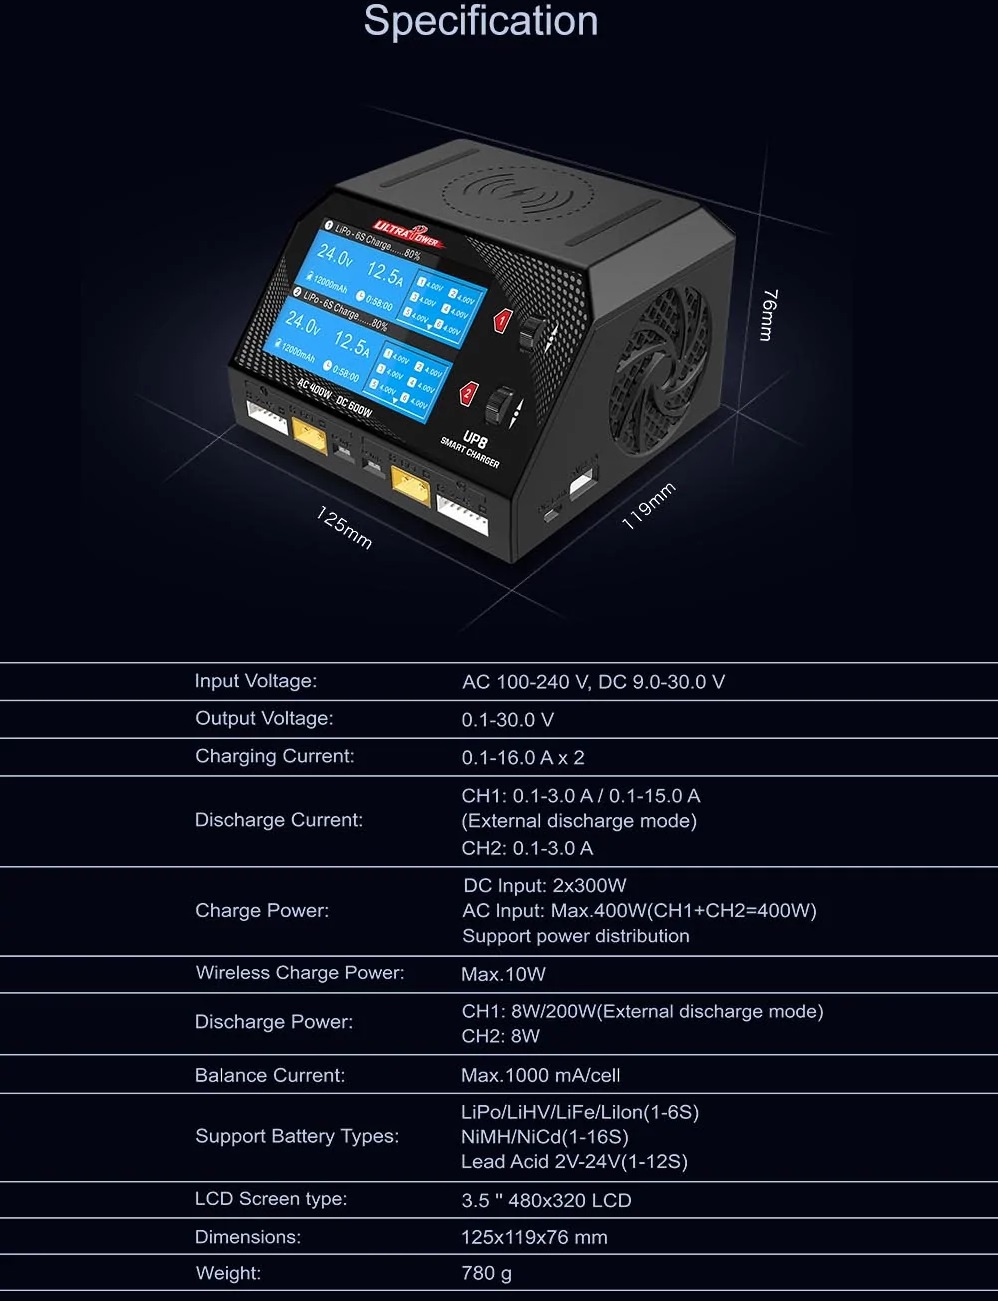 Ultra Power UP8 600W Smart Dual Channel AC/DC Charger - ウインドウを閉じる